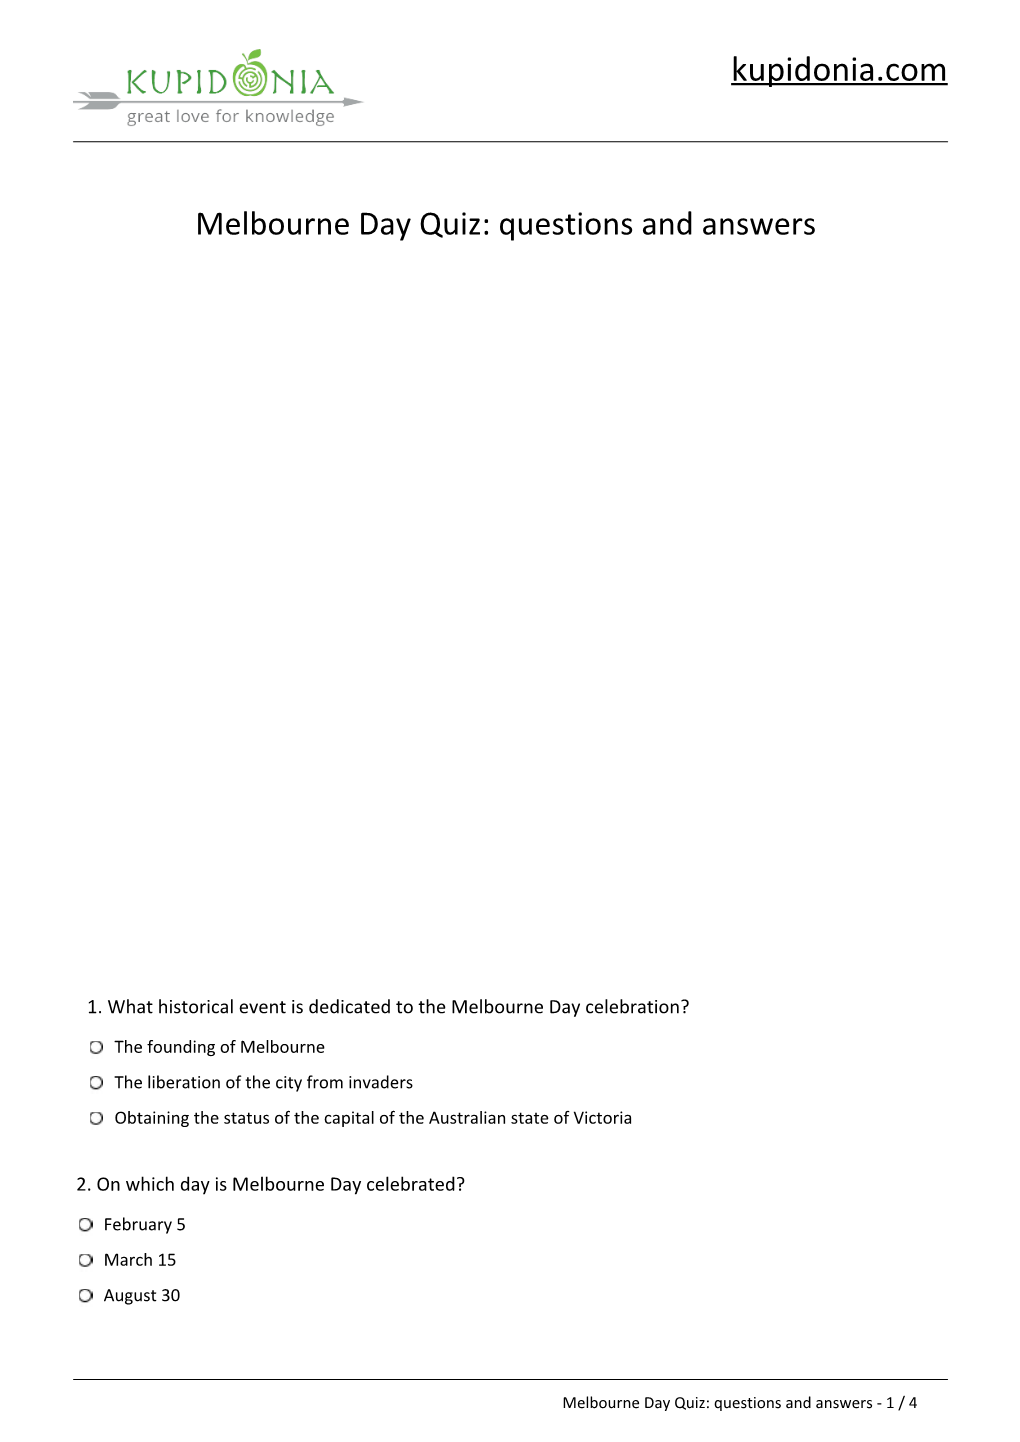 Melbourne Day Quiz: Questions and Answers